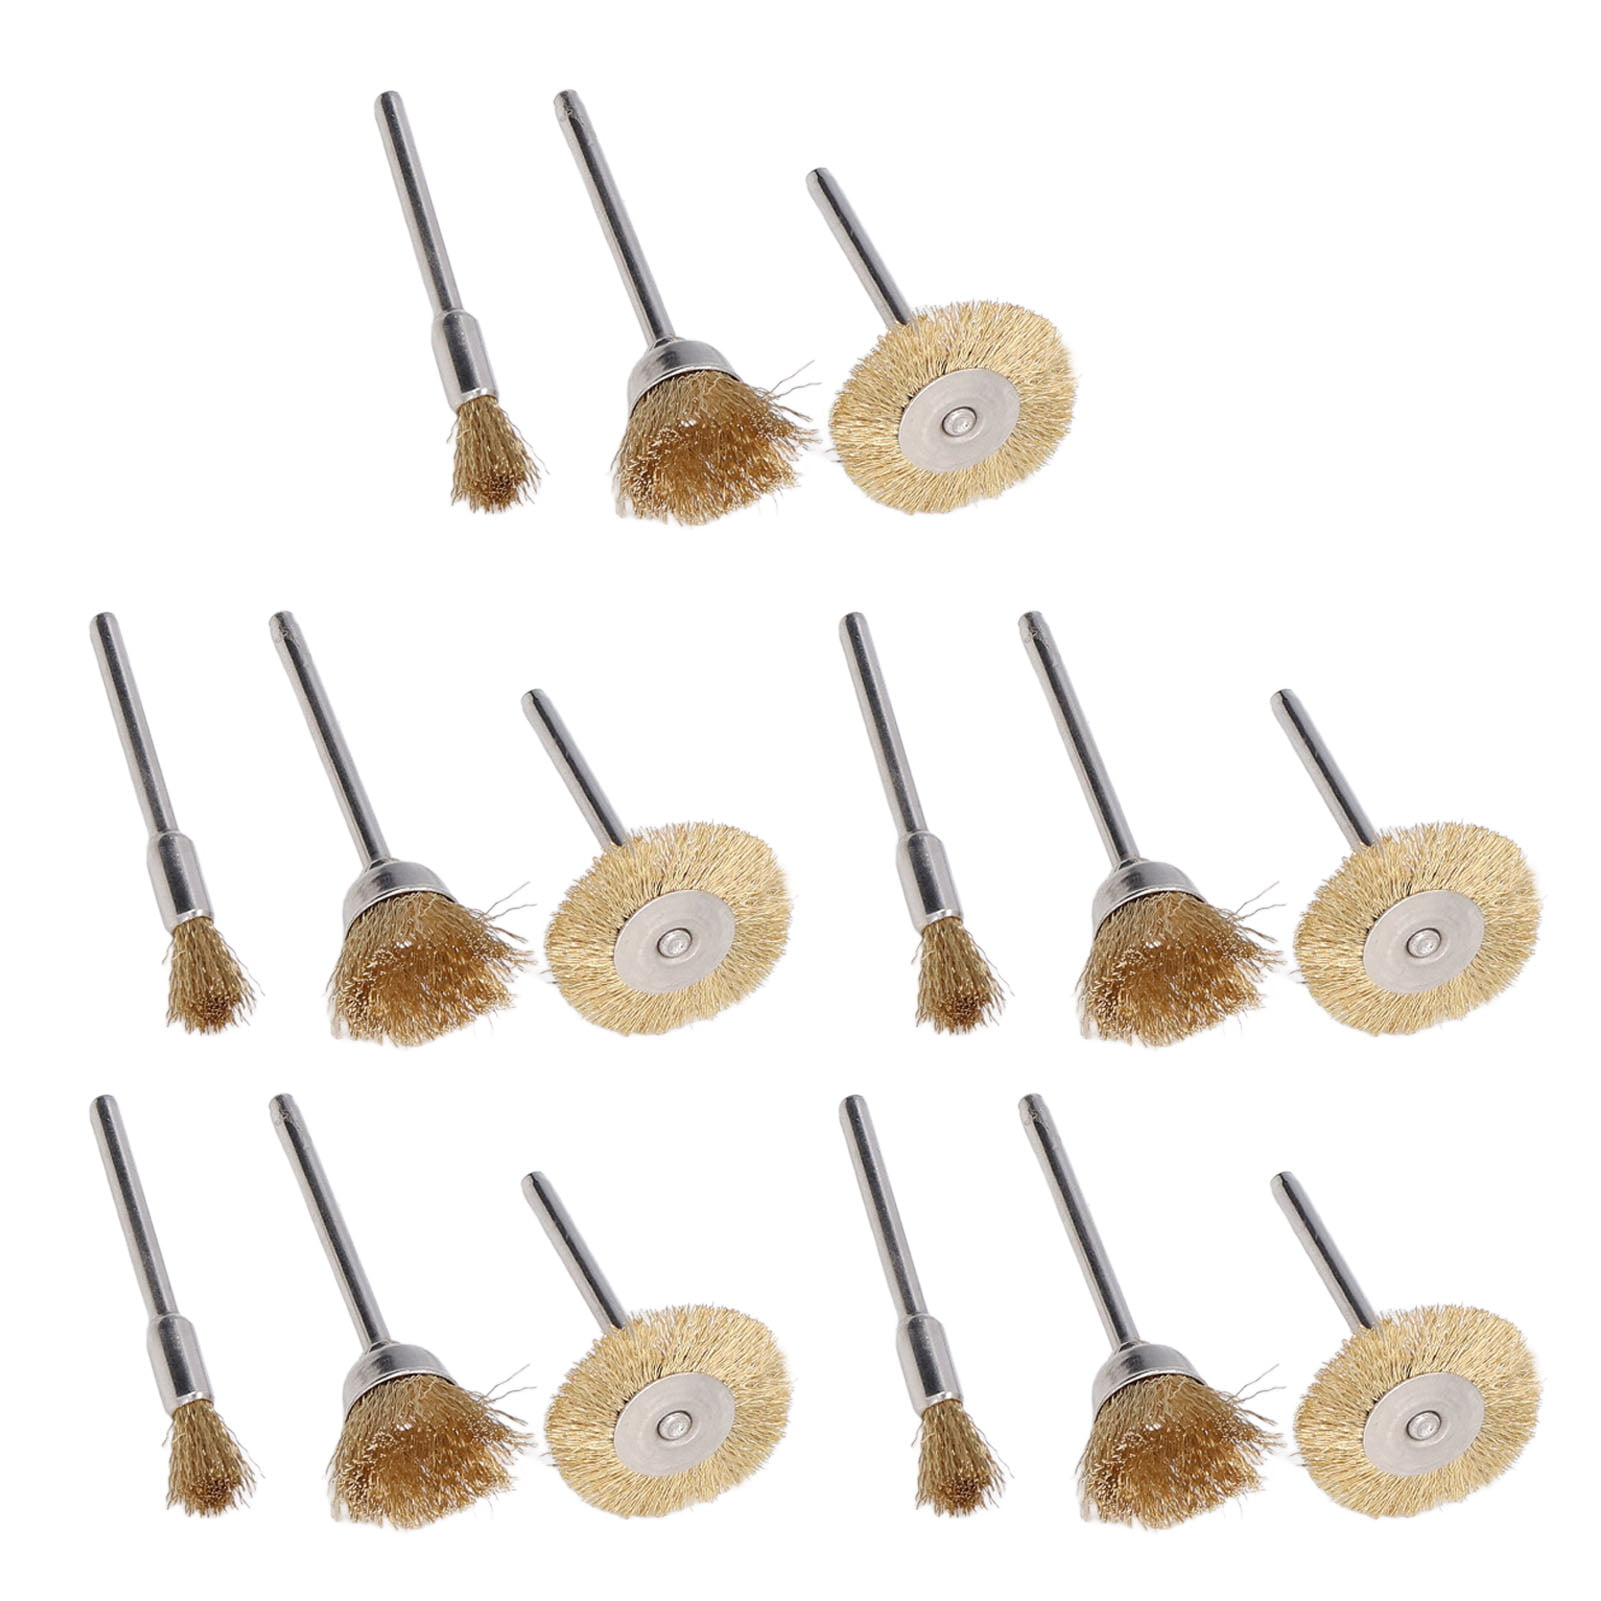 Drill Wires Cup Brushes Metal 2.35mm Shank Diameter High Hardness for DIY Bowl type Wire Wheel Brush 